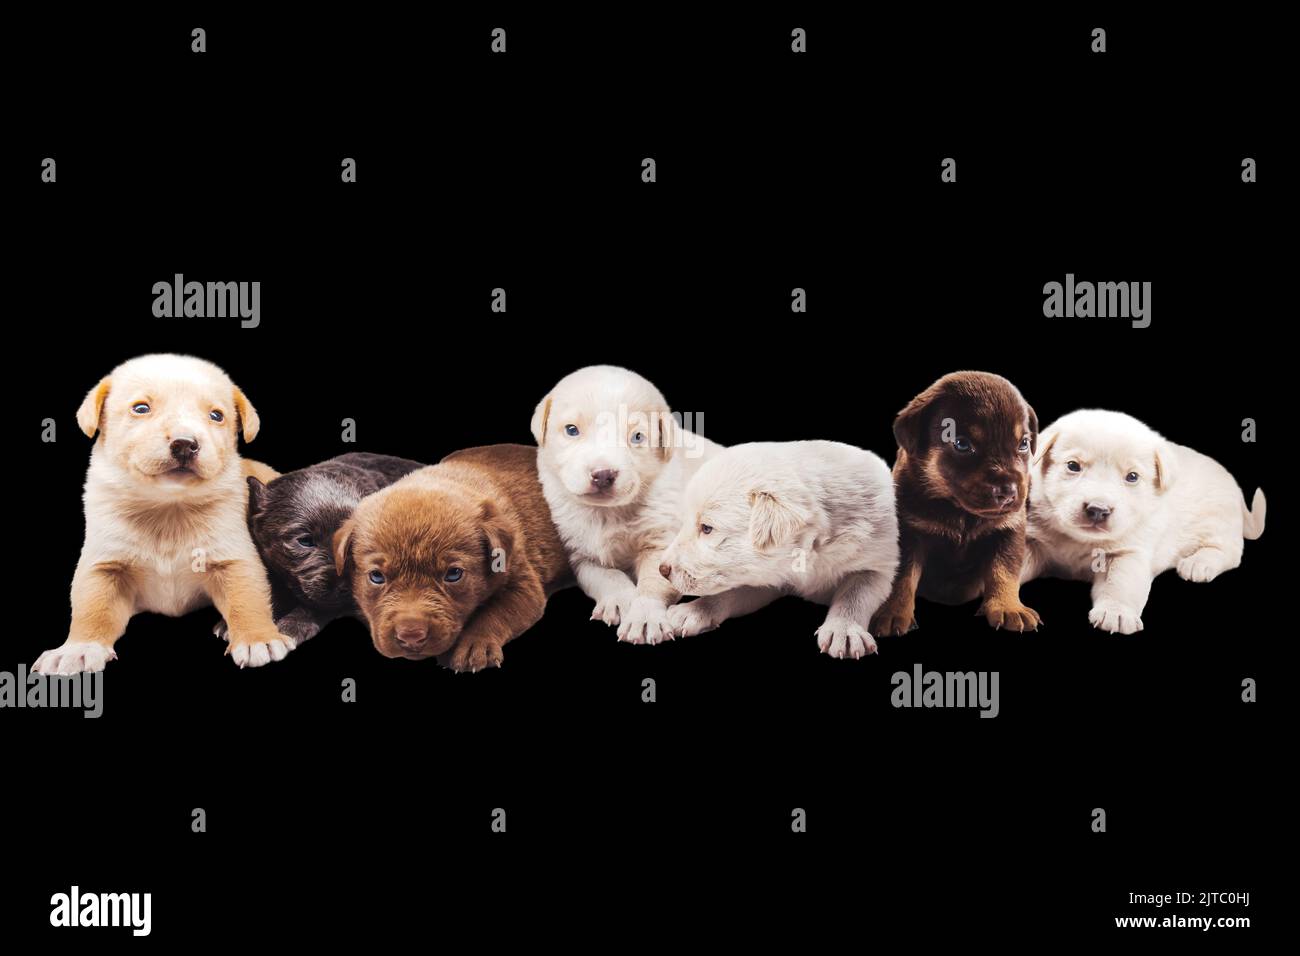 puppies isolated on black background Stock Photo